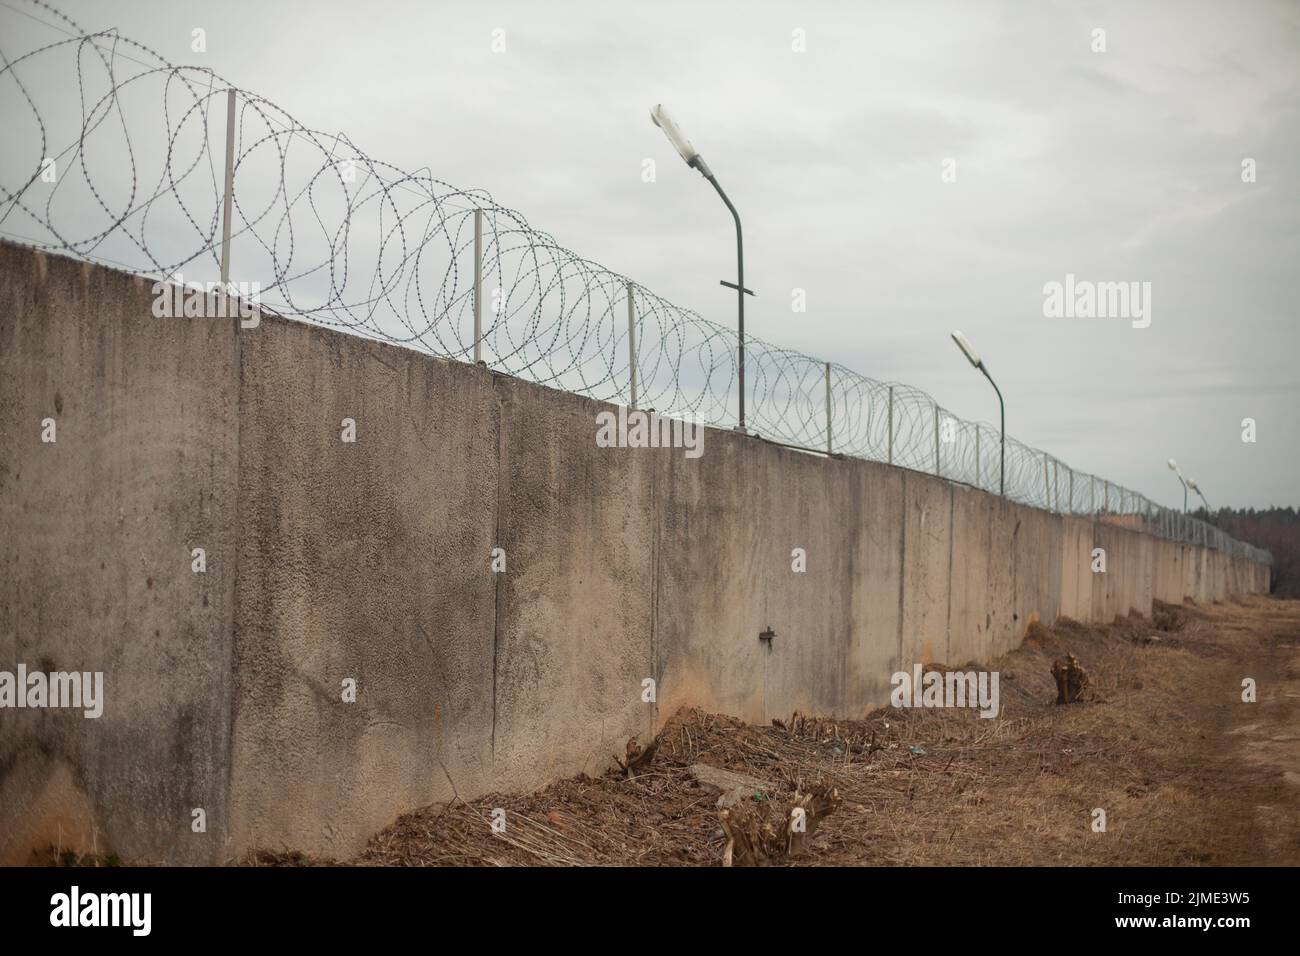 Fence with barbed wire. Fencing around the territory. Stock Photo